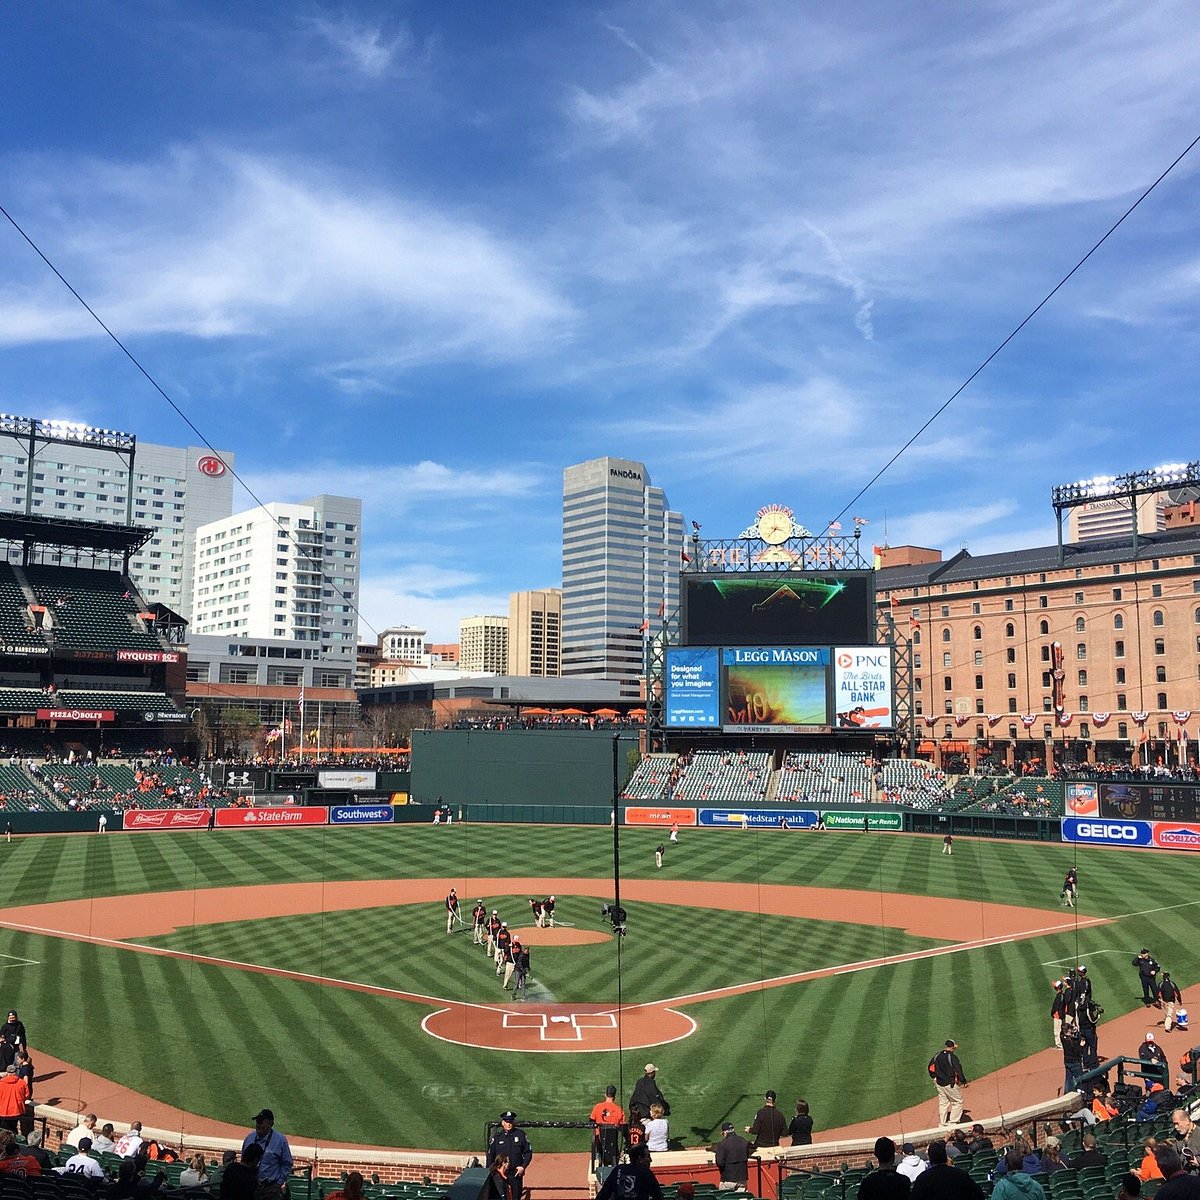 It was an absolutely perfect night in Birdland - Camden Chat